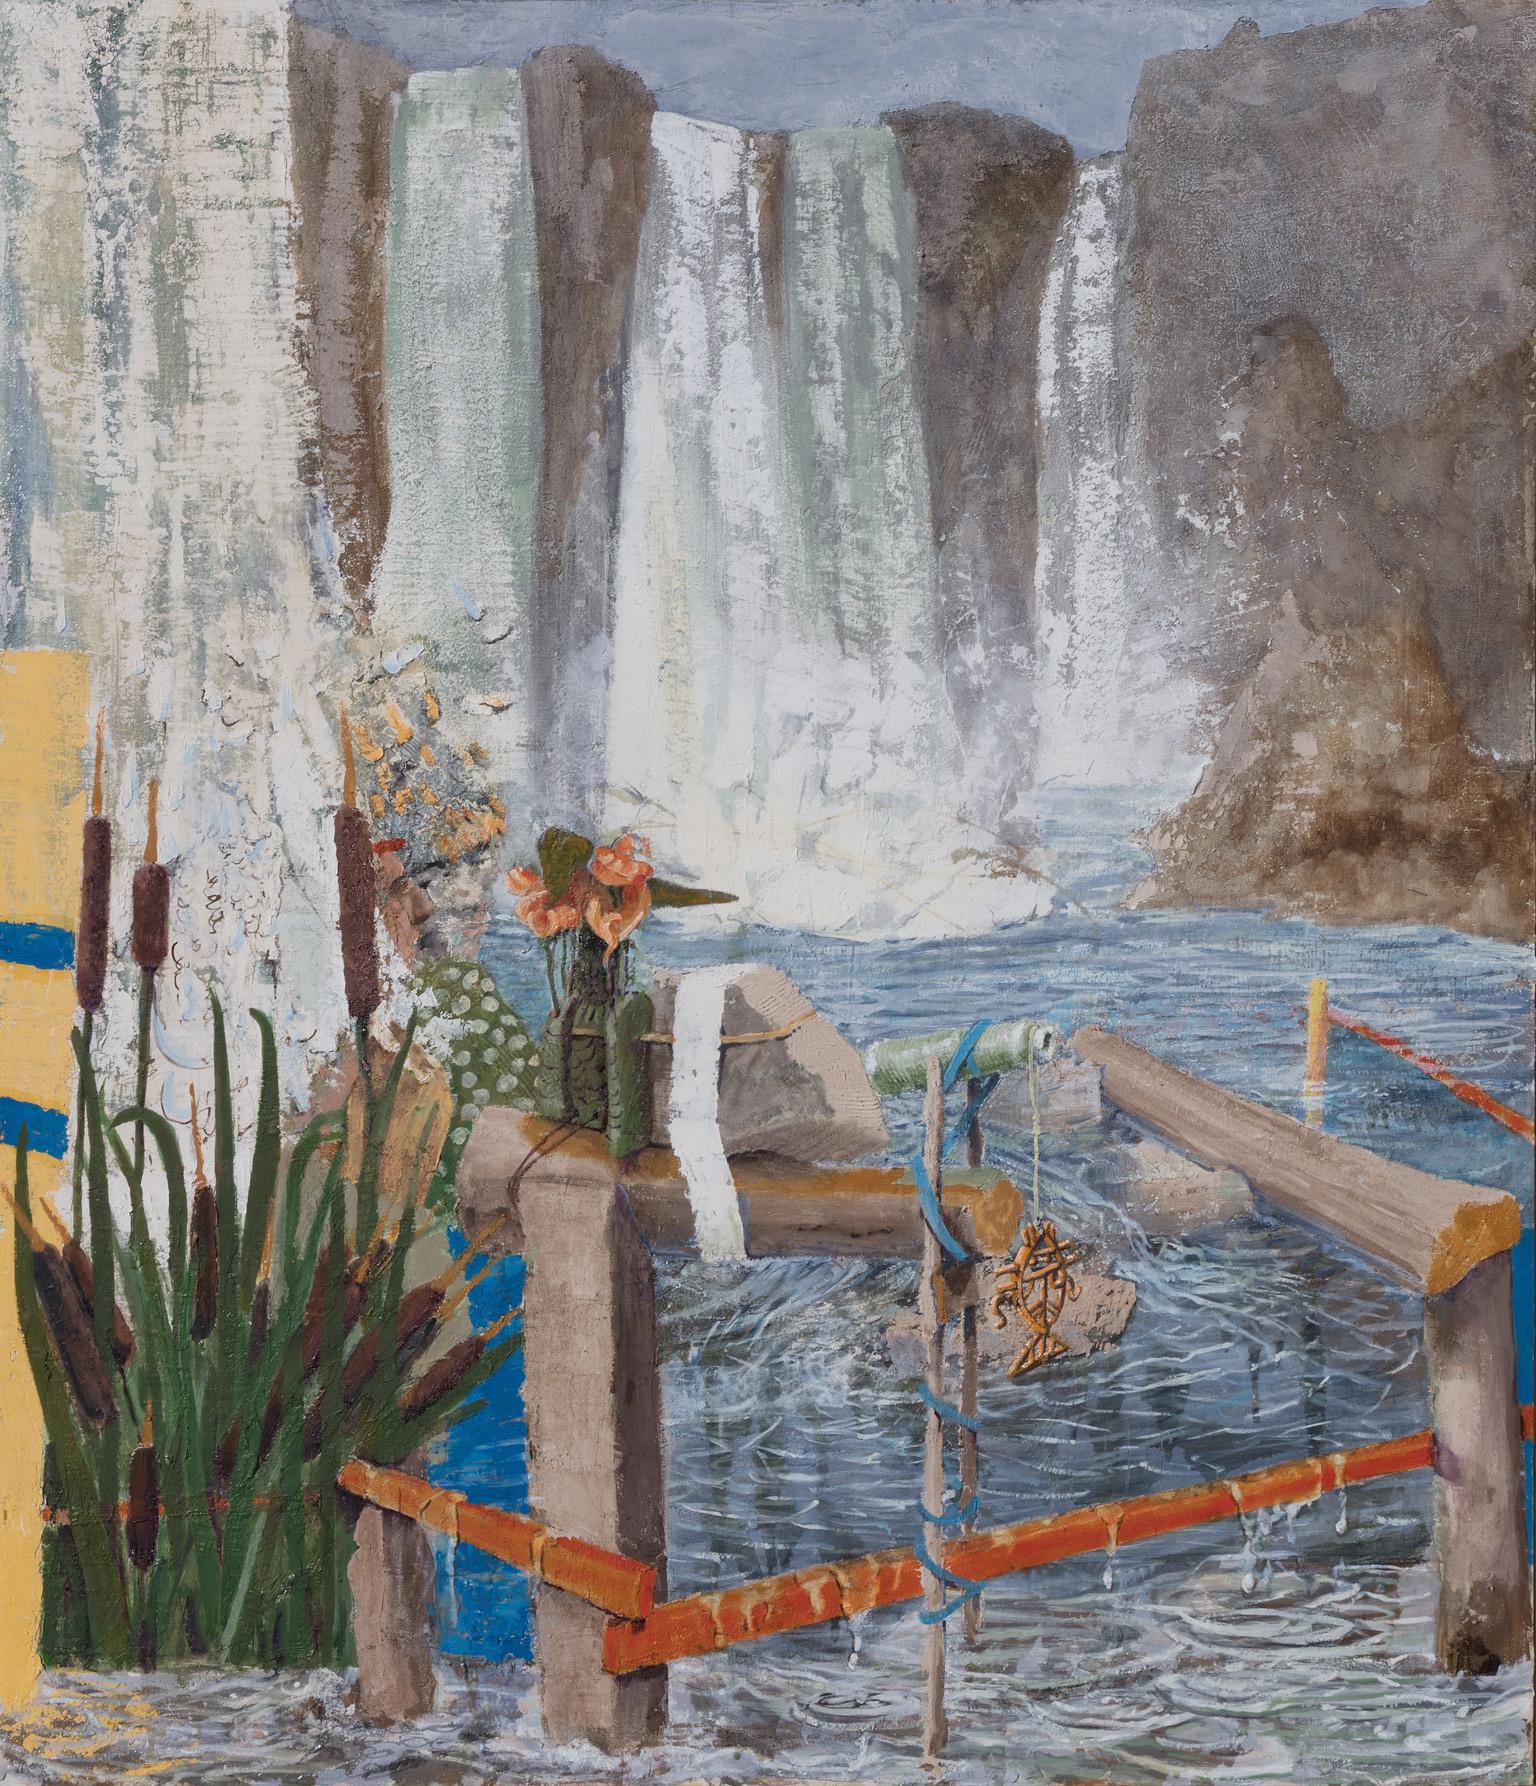 Gregory Kitterle Figurative Painting - Offering - Painting with Waterfall and Dongli Flowers, in Light Blue